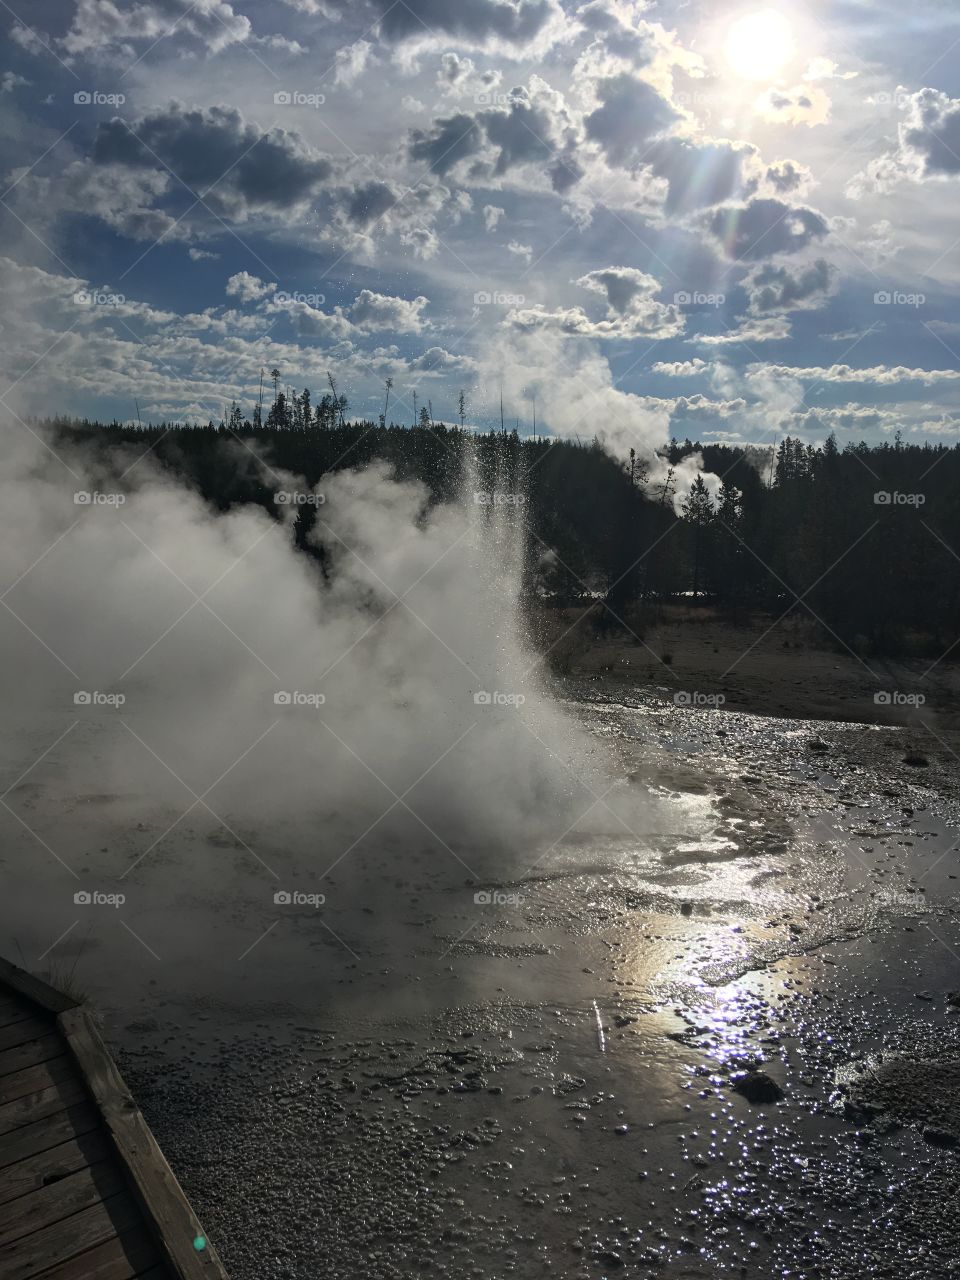 Jet Geyser in Yellowstone National Park, USA